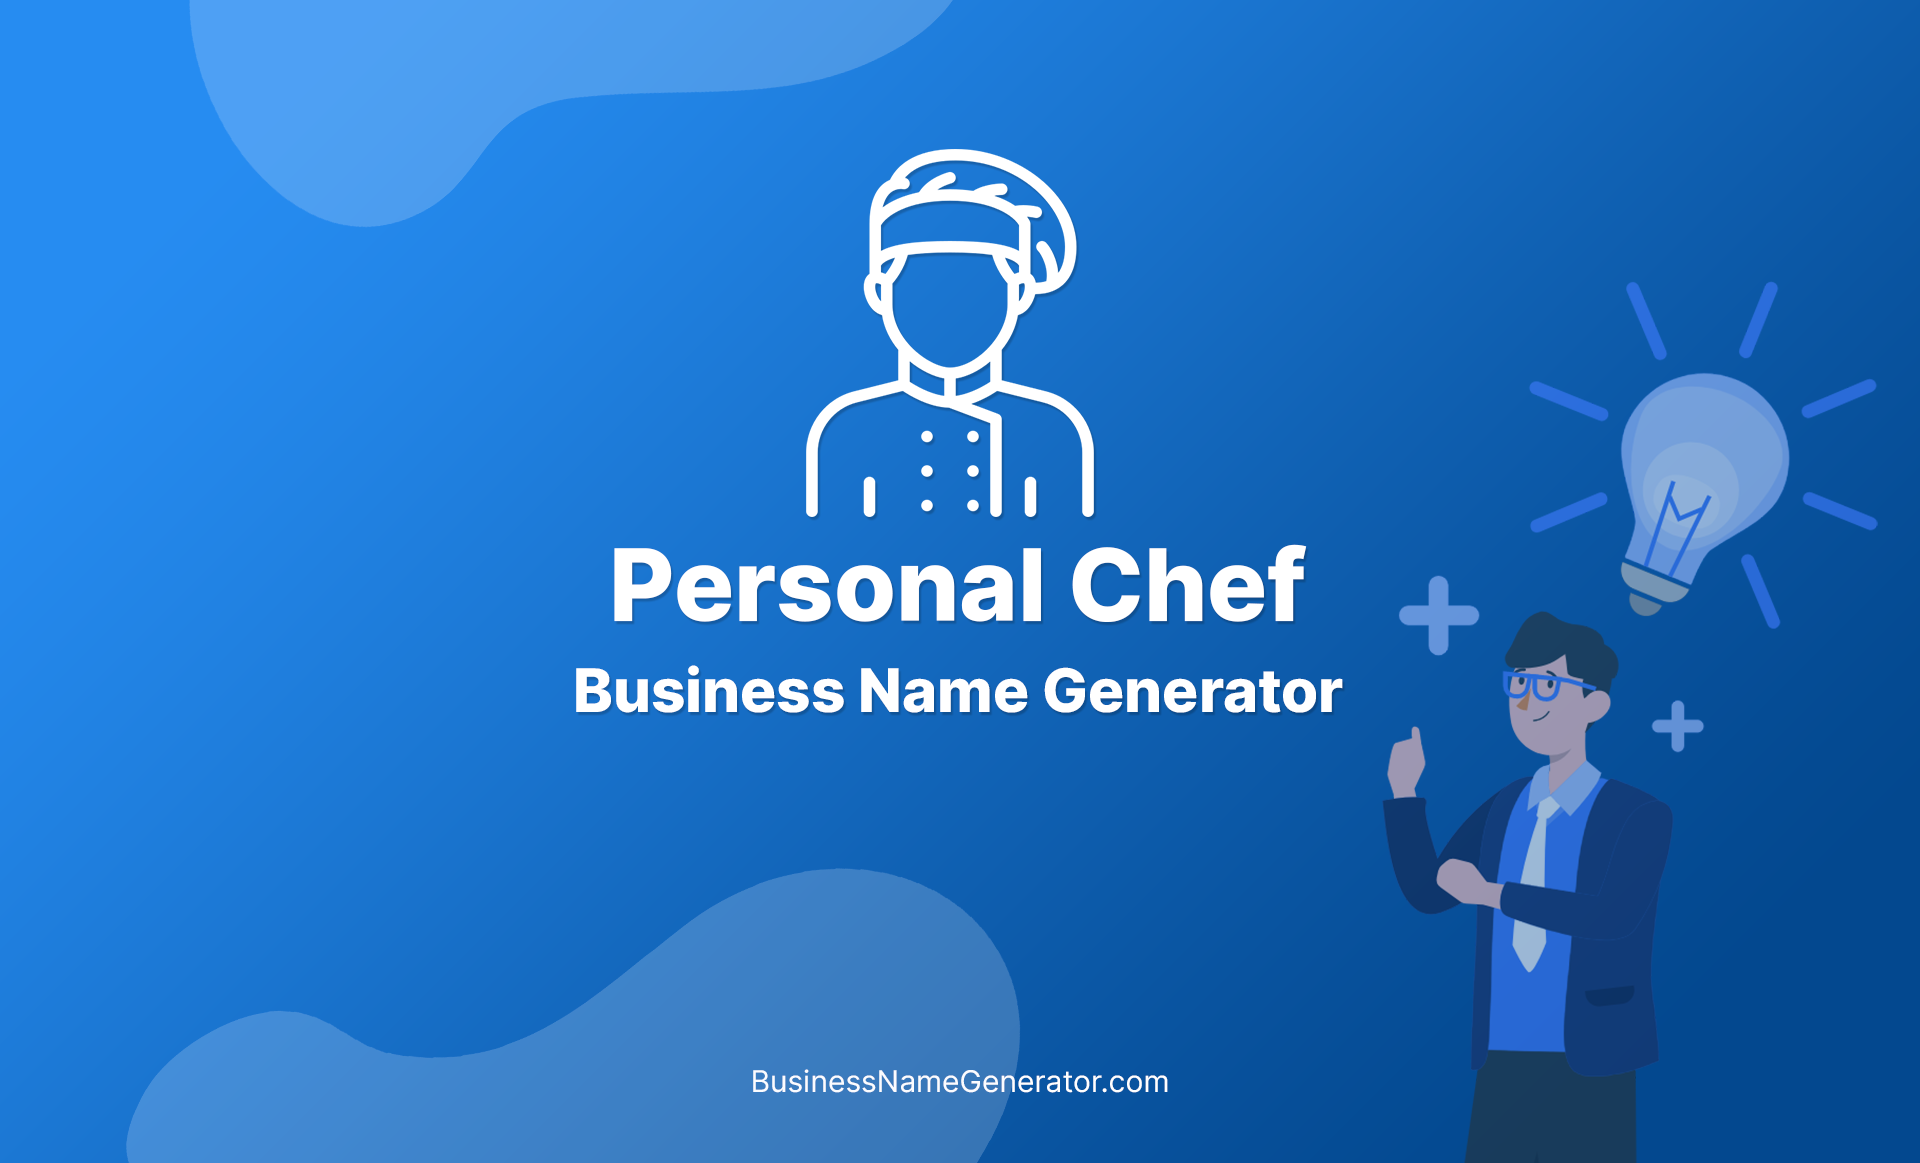 Personal Chef Business Name Generator